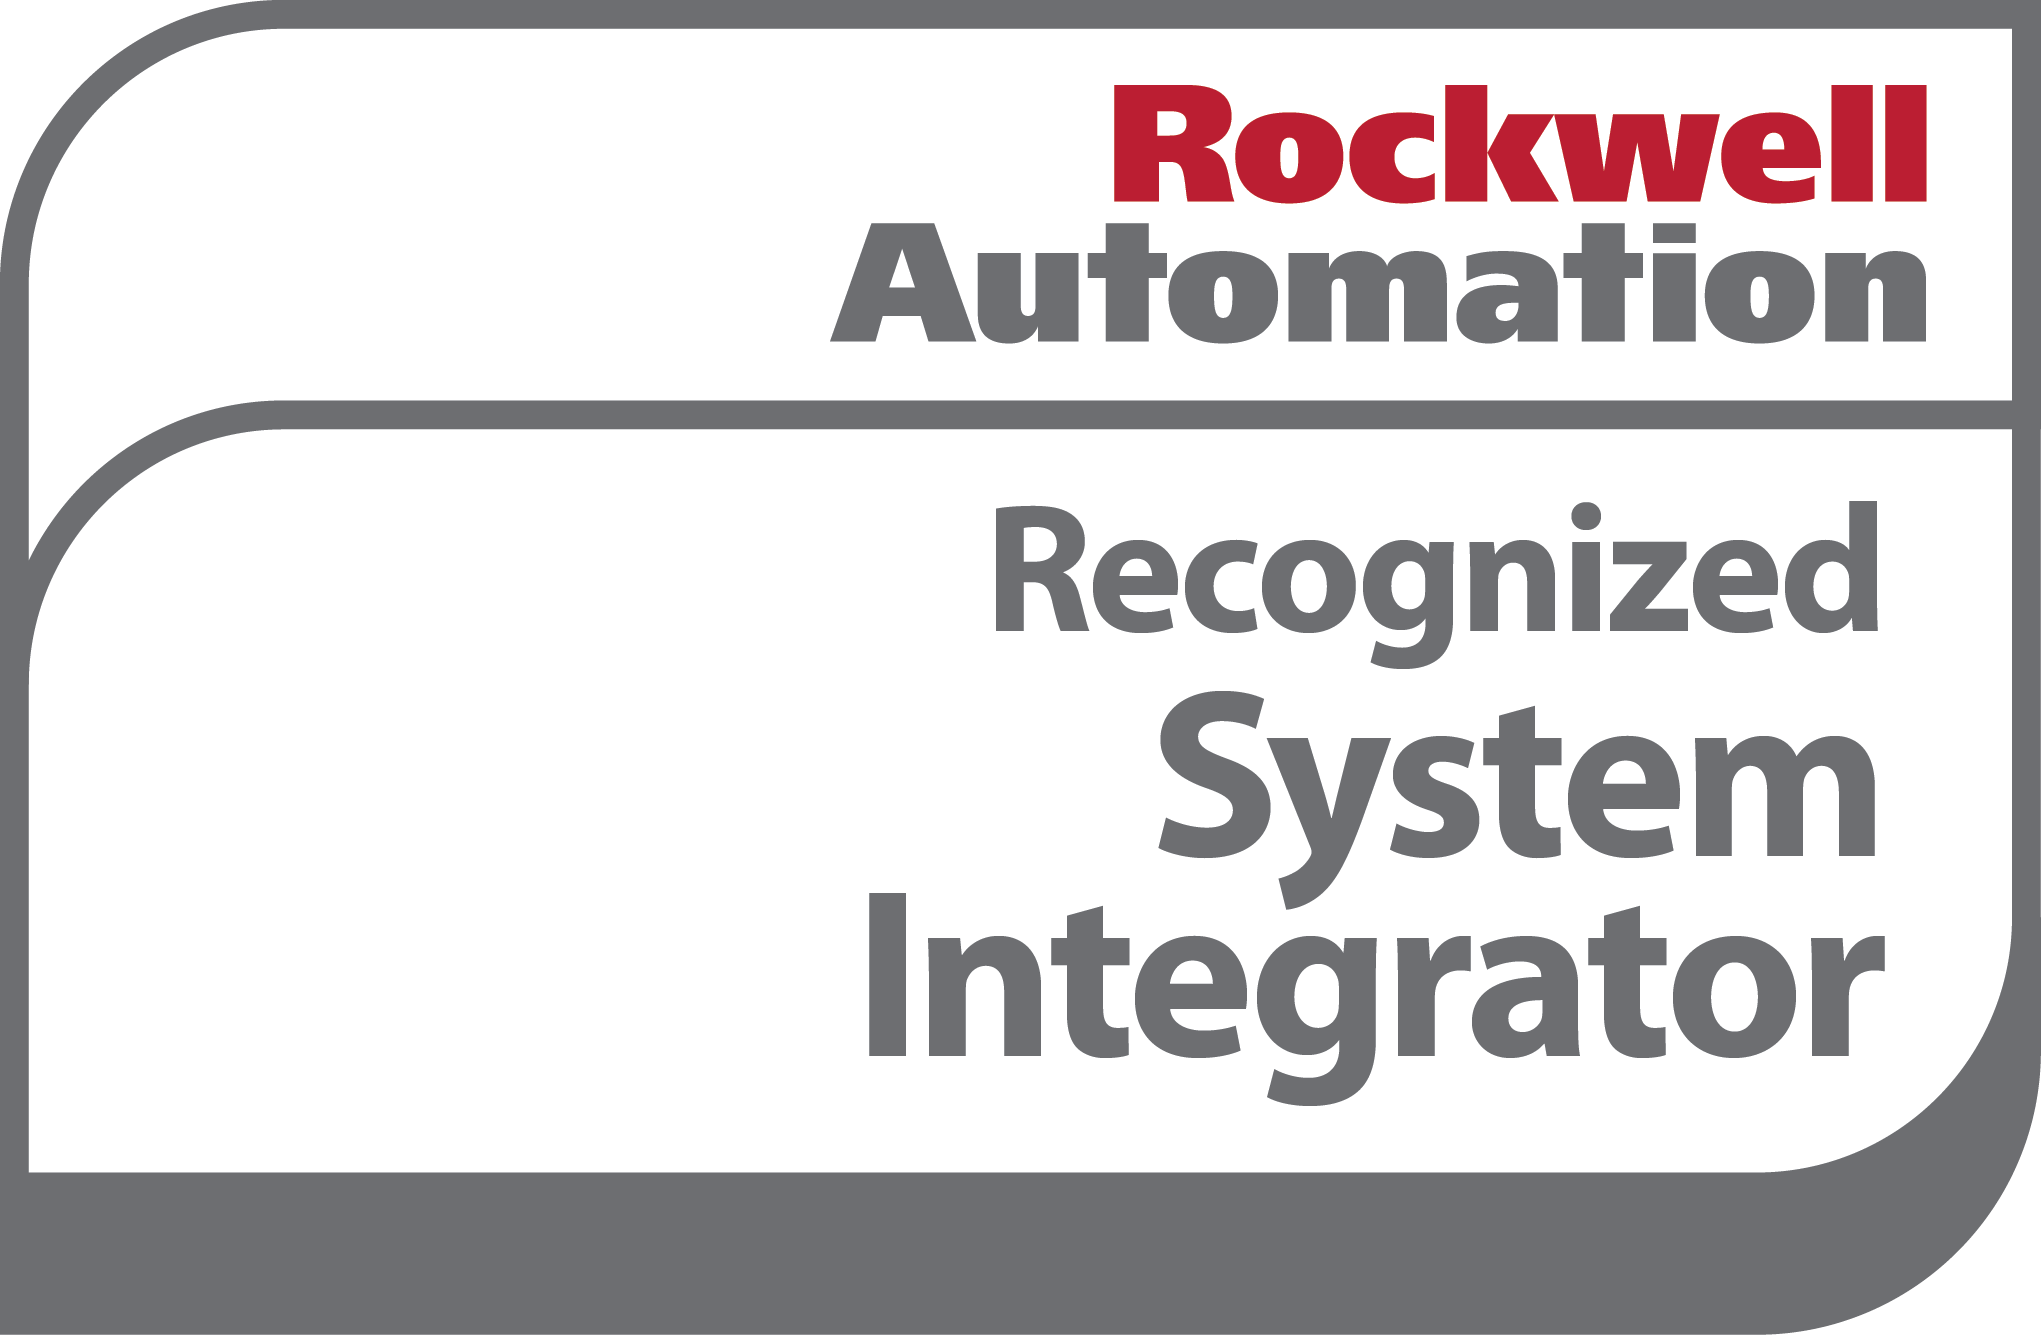 Rockwell Automation Recognized Systems Integrator logo